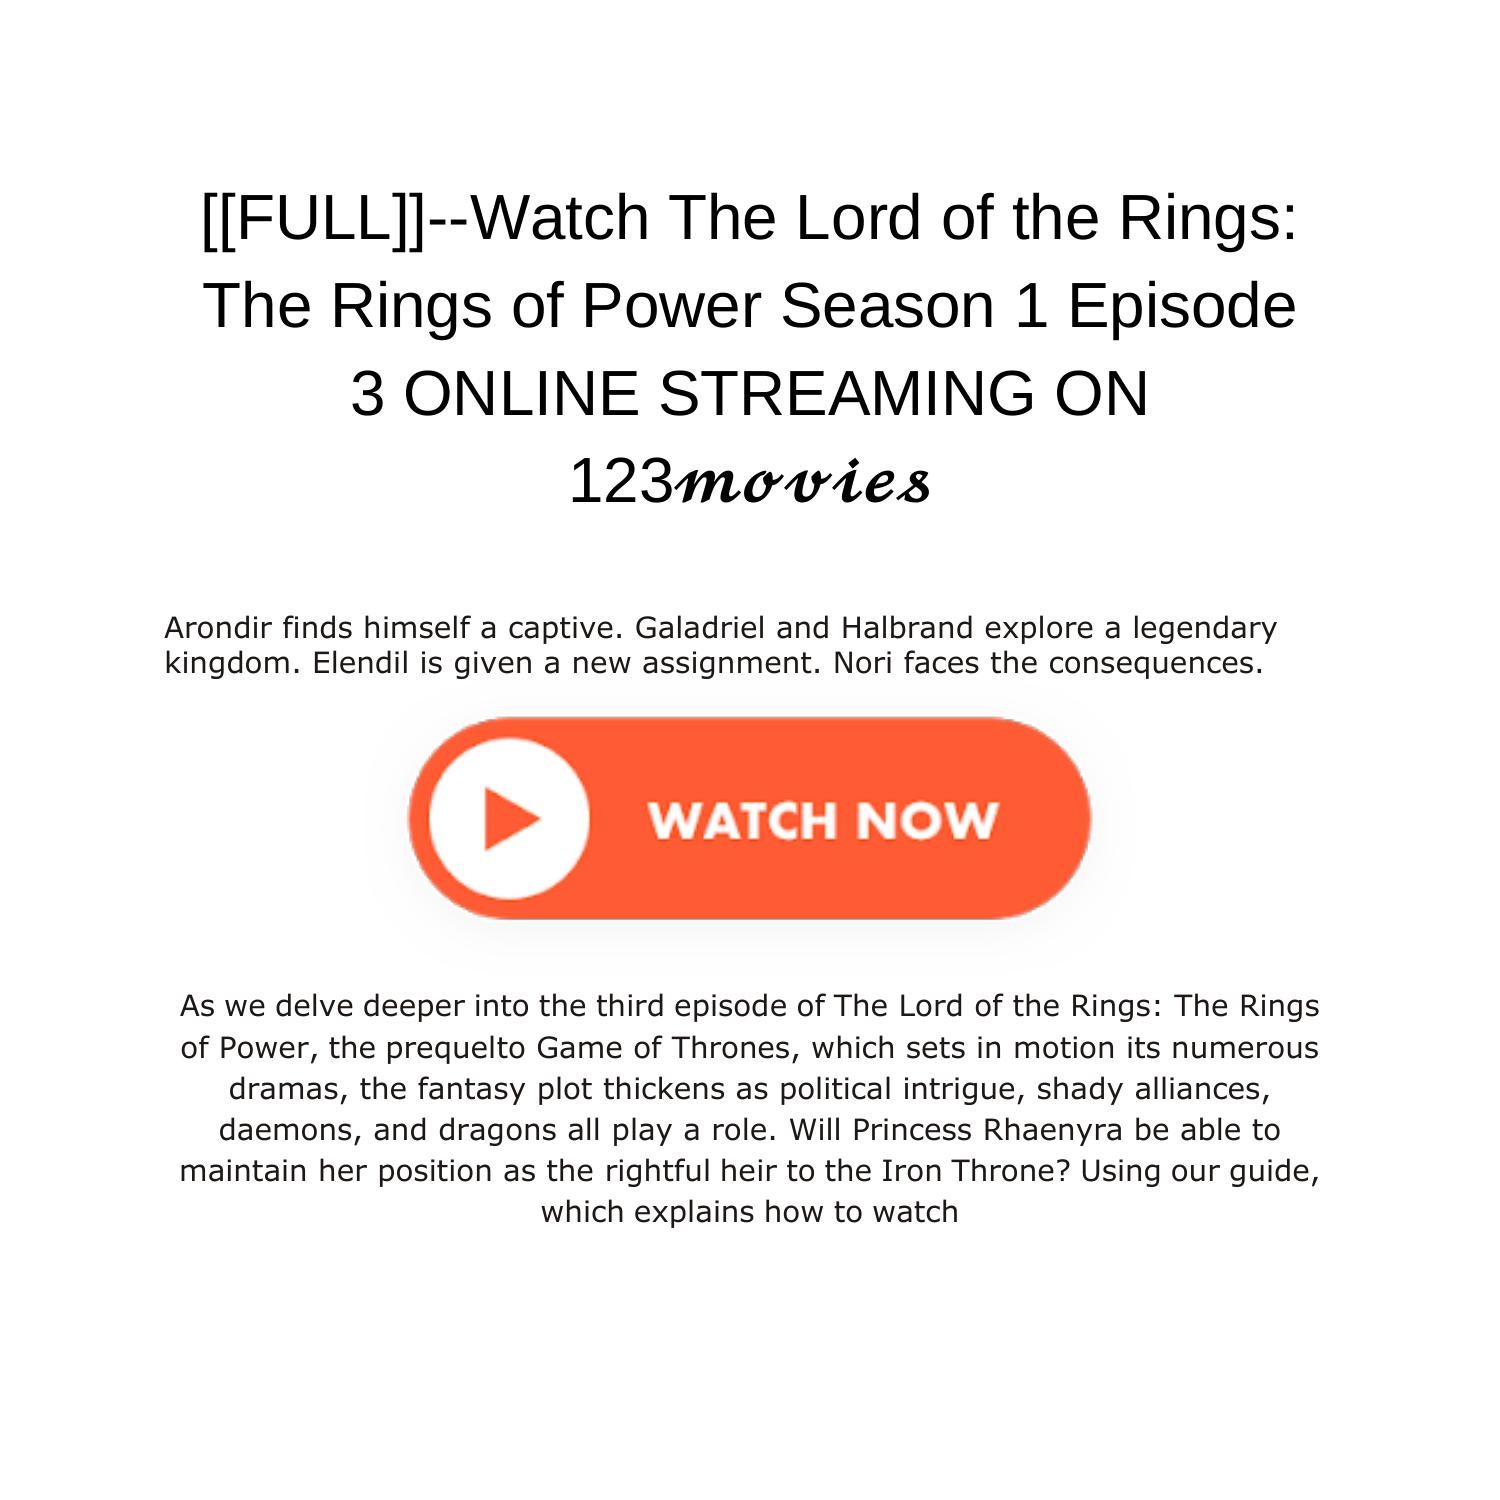 Heel boos tofu reservoir Watch The Lord of the Rings The Rings of Power Season 1 Episode 3.pdf |  DocDroid